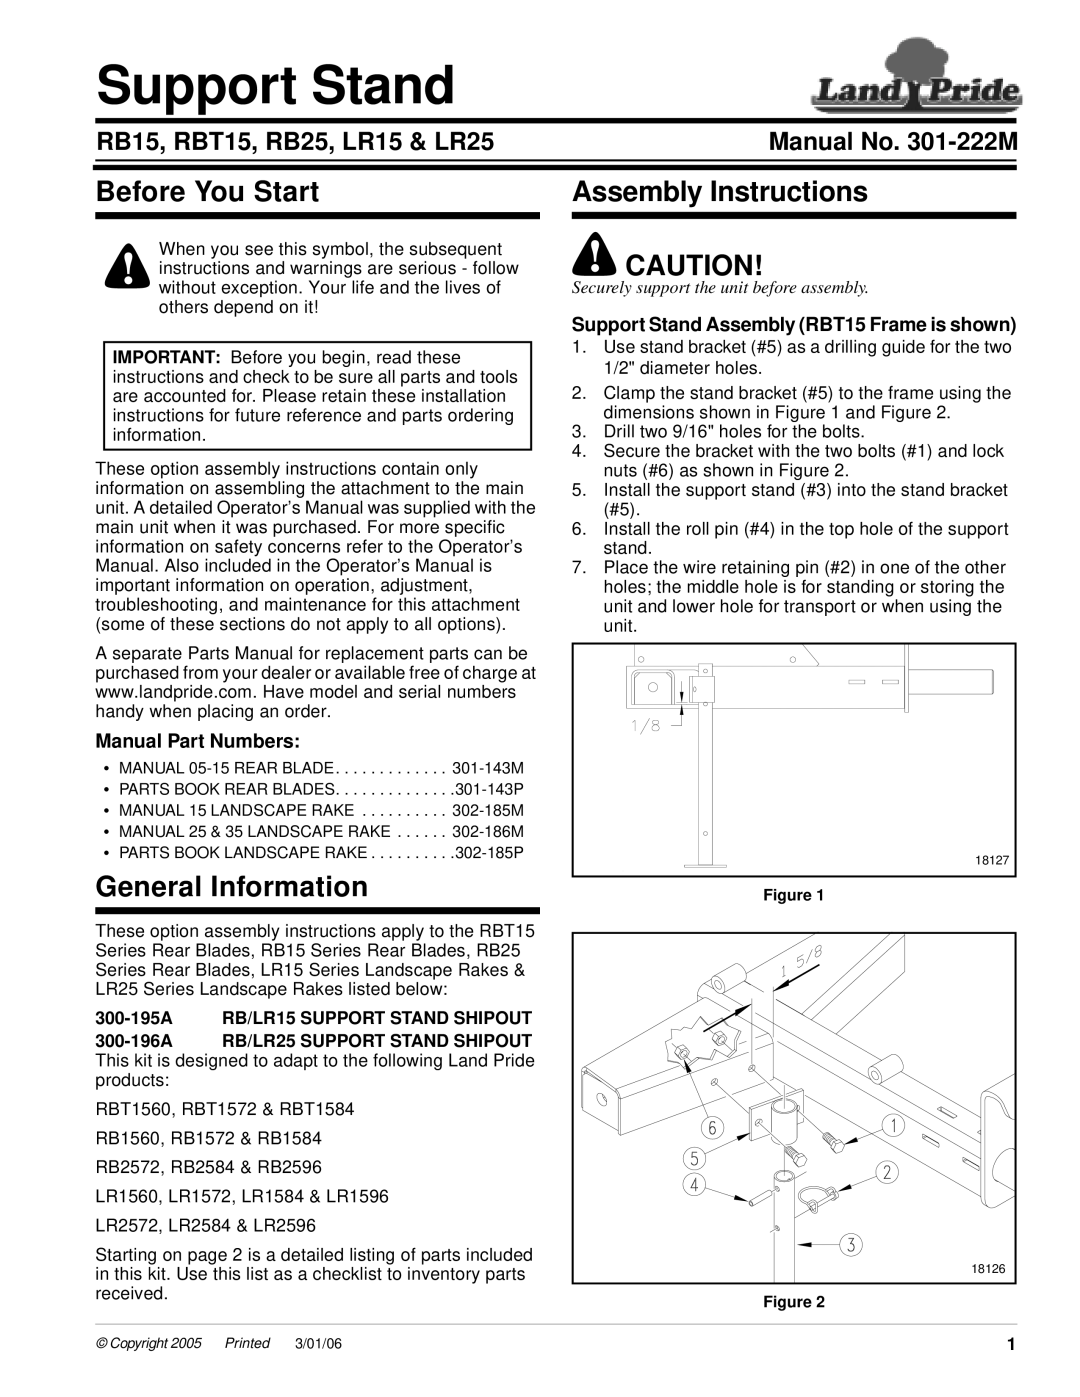 Land Pride LR25 installation instructions 300-195ARB/LR15 SUPPORT STAND SHIPOUT, Support Stand, Before You Start 